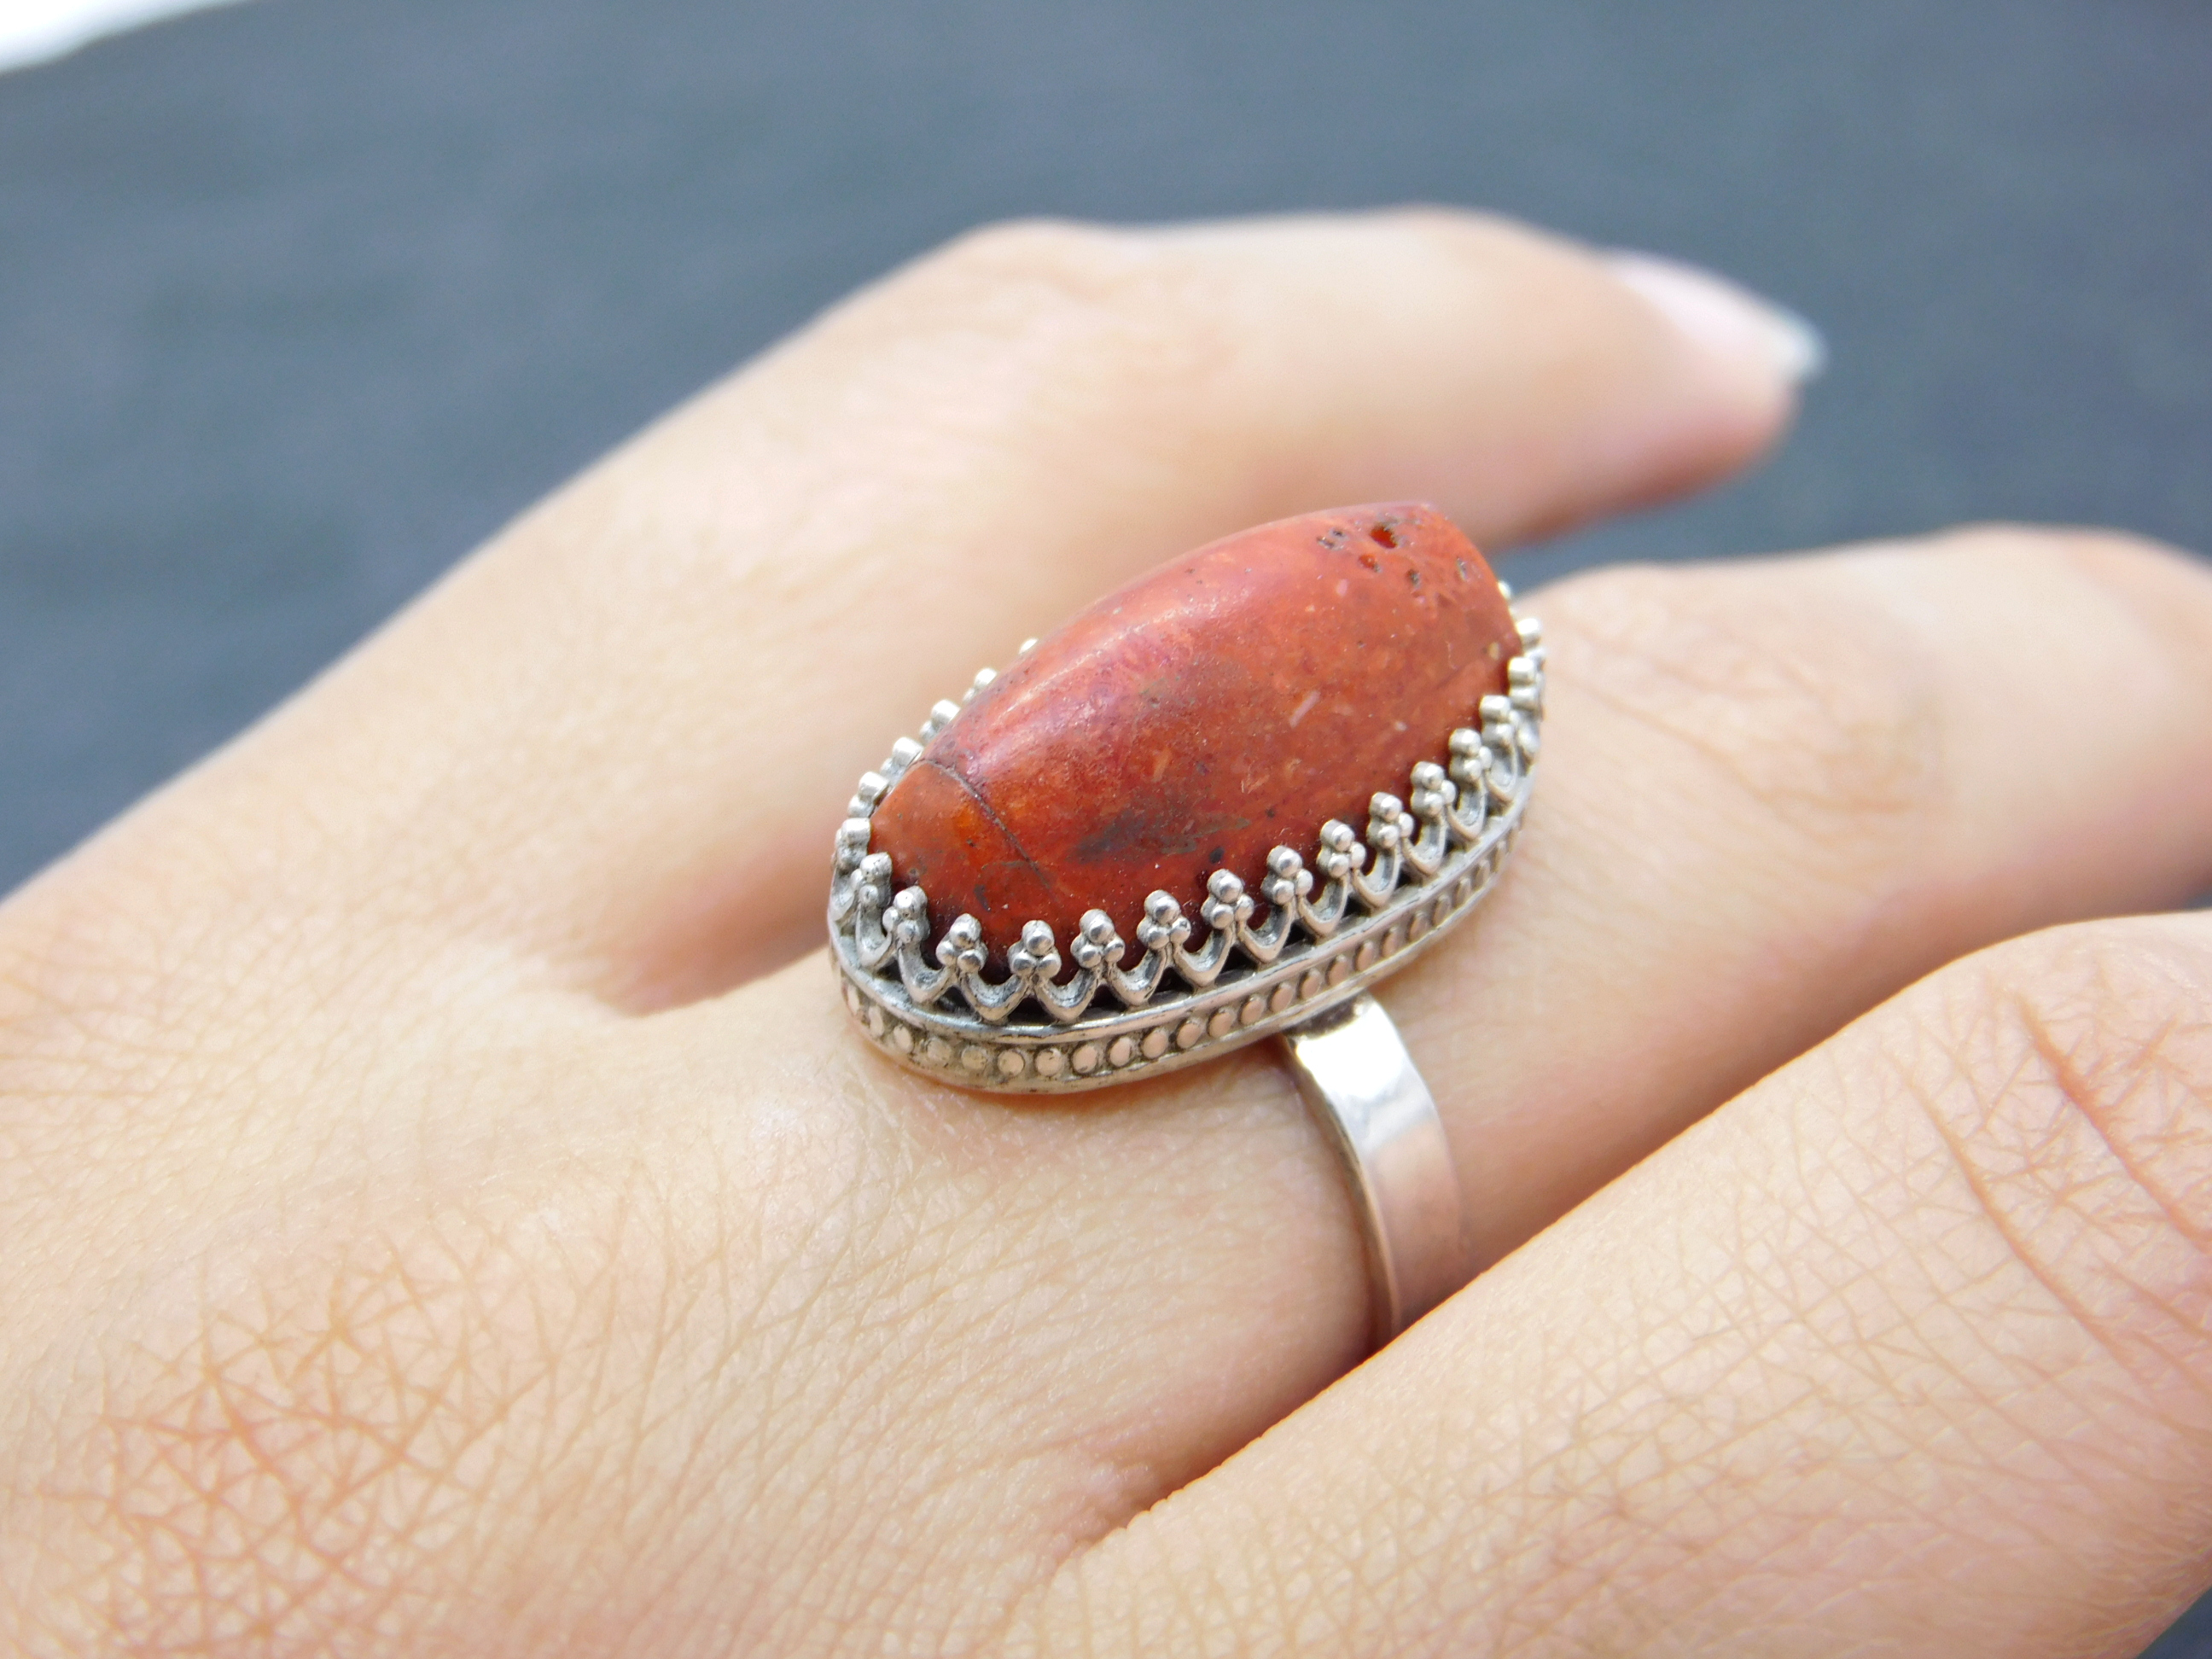 Sponge coral ring in hand forged decorative setting - Sterlingsilver